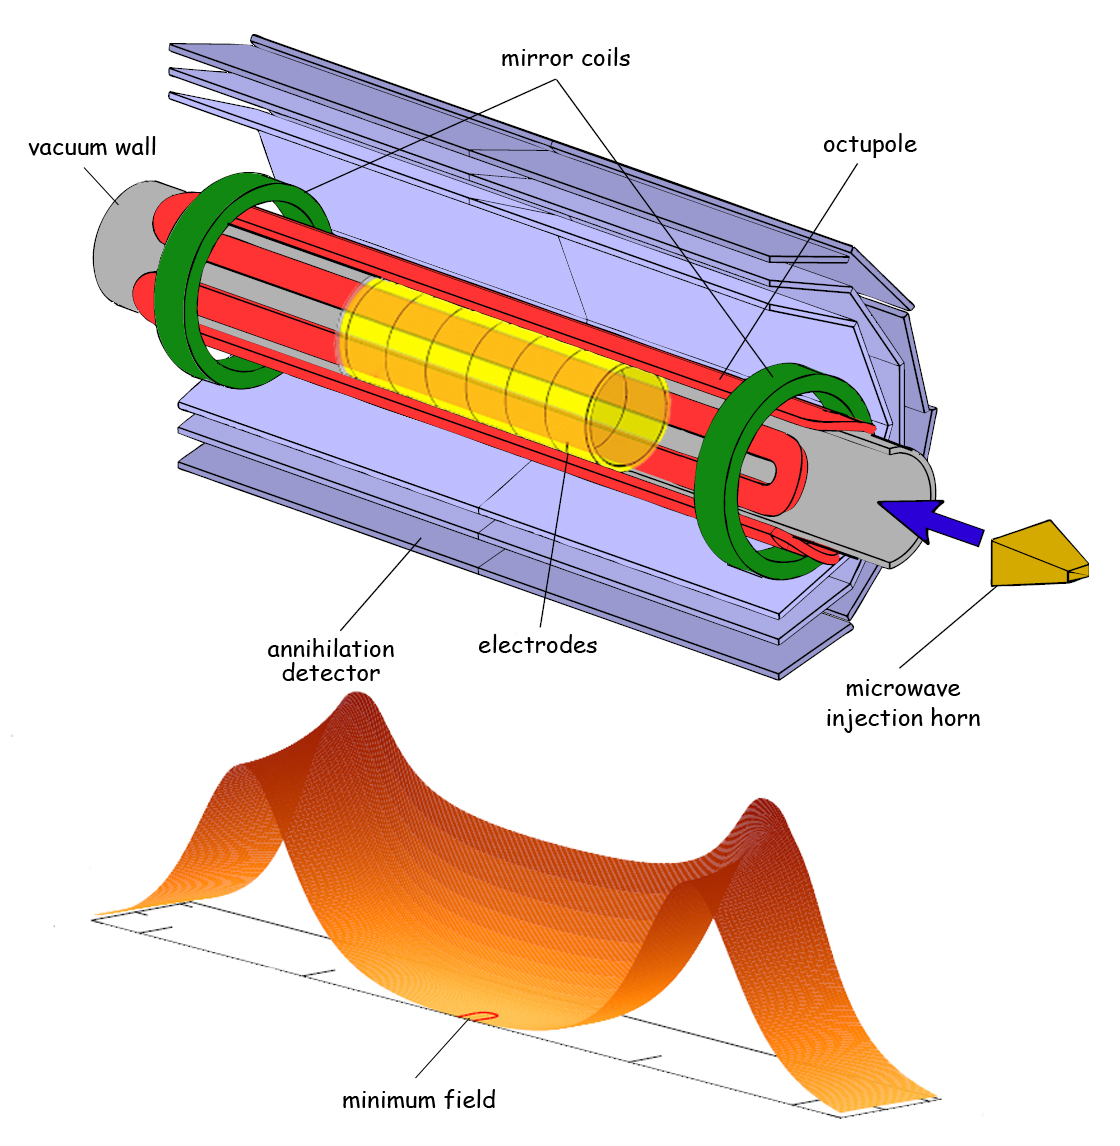 At top, a cutaway schematic of the ALPHA antimatter trap shows the superconducting octupole magnet and mirror magnets and other features. Below is a map of magnetic field strength inside the trap. The goal is to measure the hyperfine structure of antihydrogen atoms at the trap’s center, where the magnetic fields are at minimum strength. 